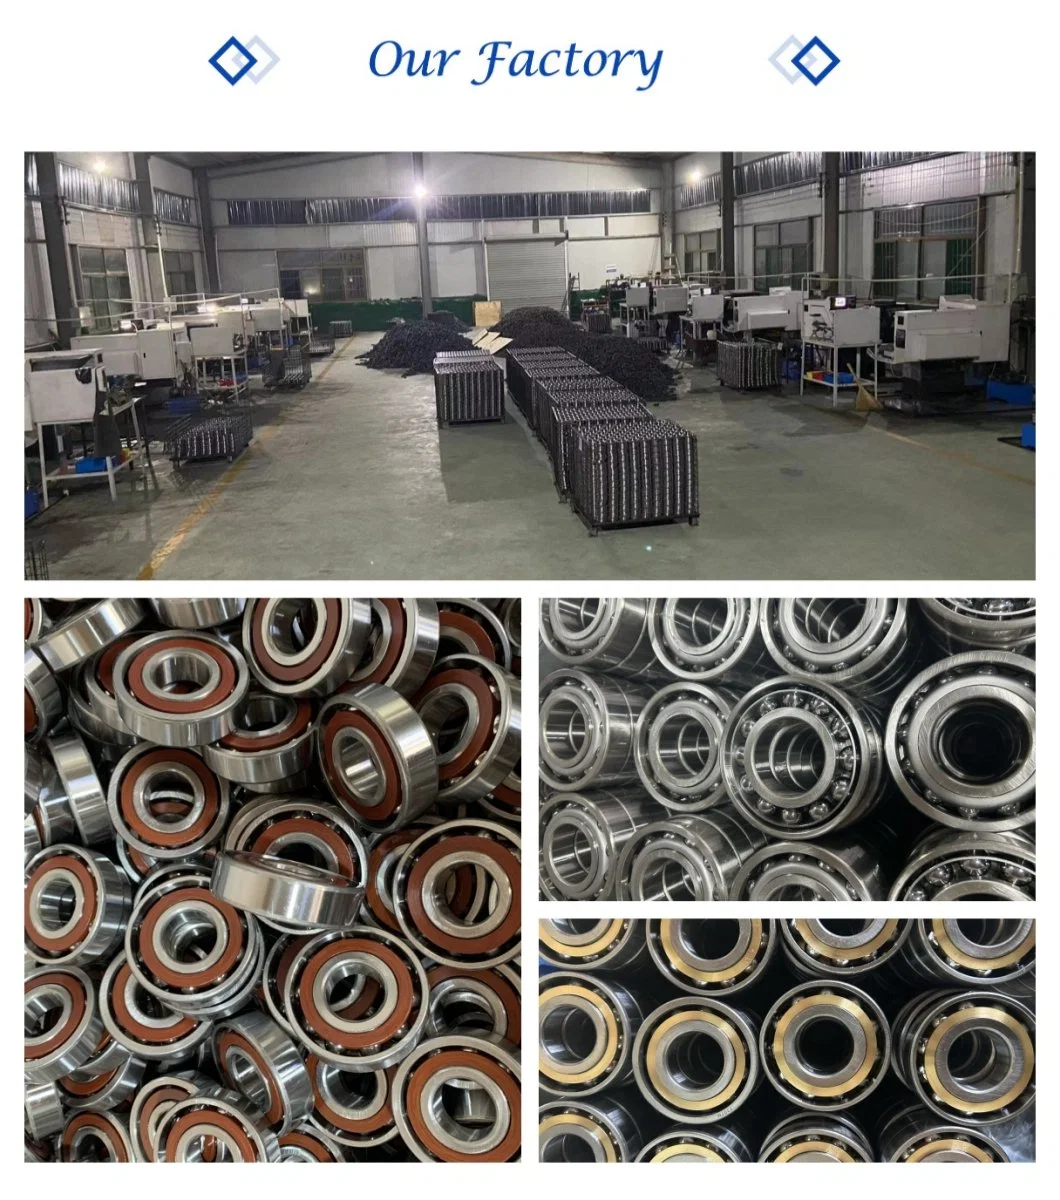 Chinese Manufacturer Supplier Auto Steering Bearings Qj210 50X90X20 mm 7013c P5 dB Precision Angular Contact Ball Bearings, 25&deg; Contact Angle